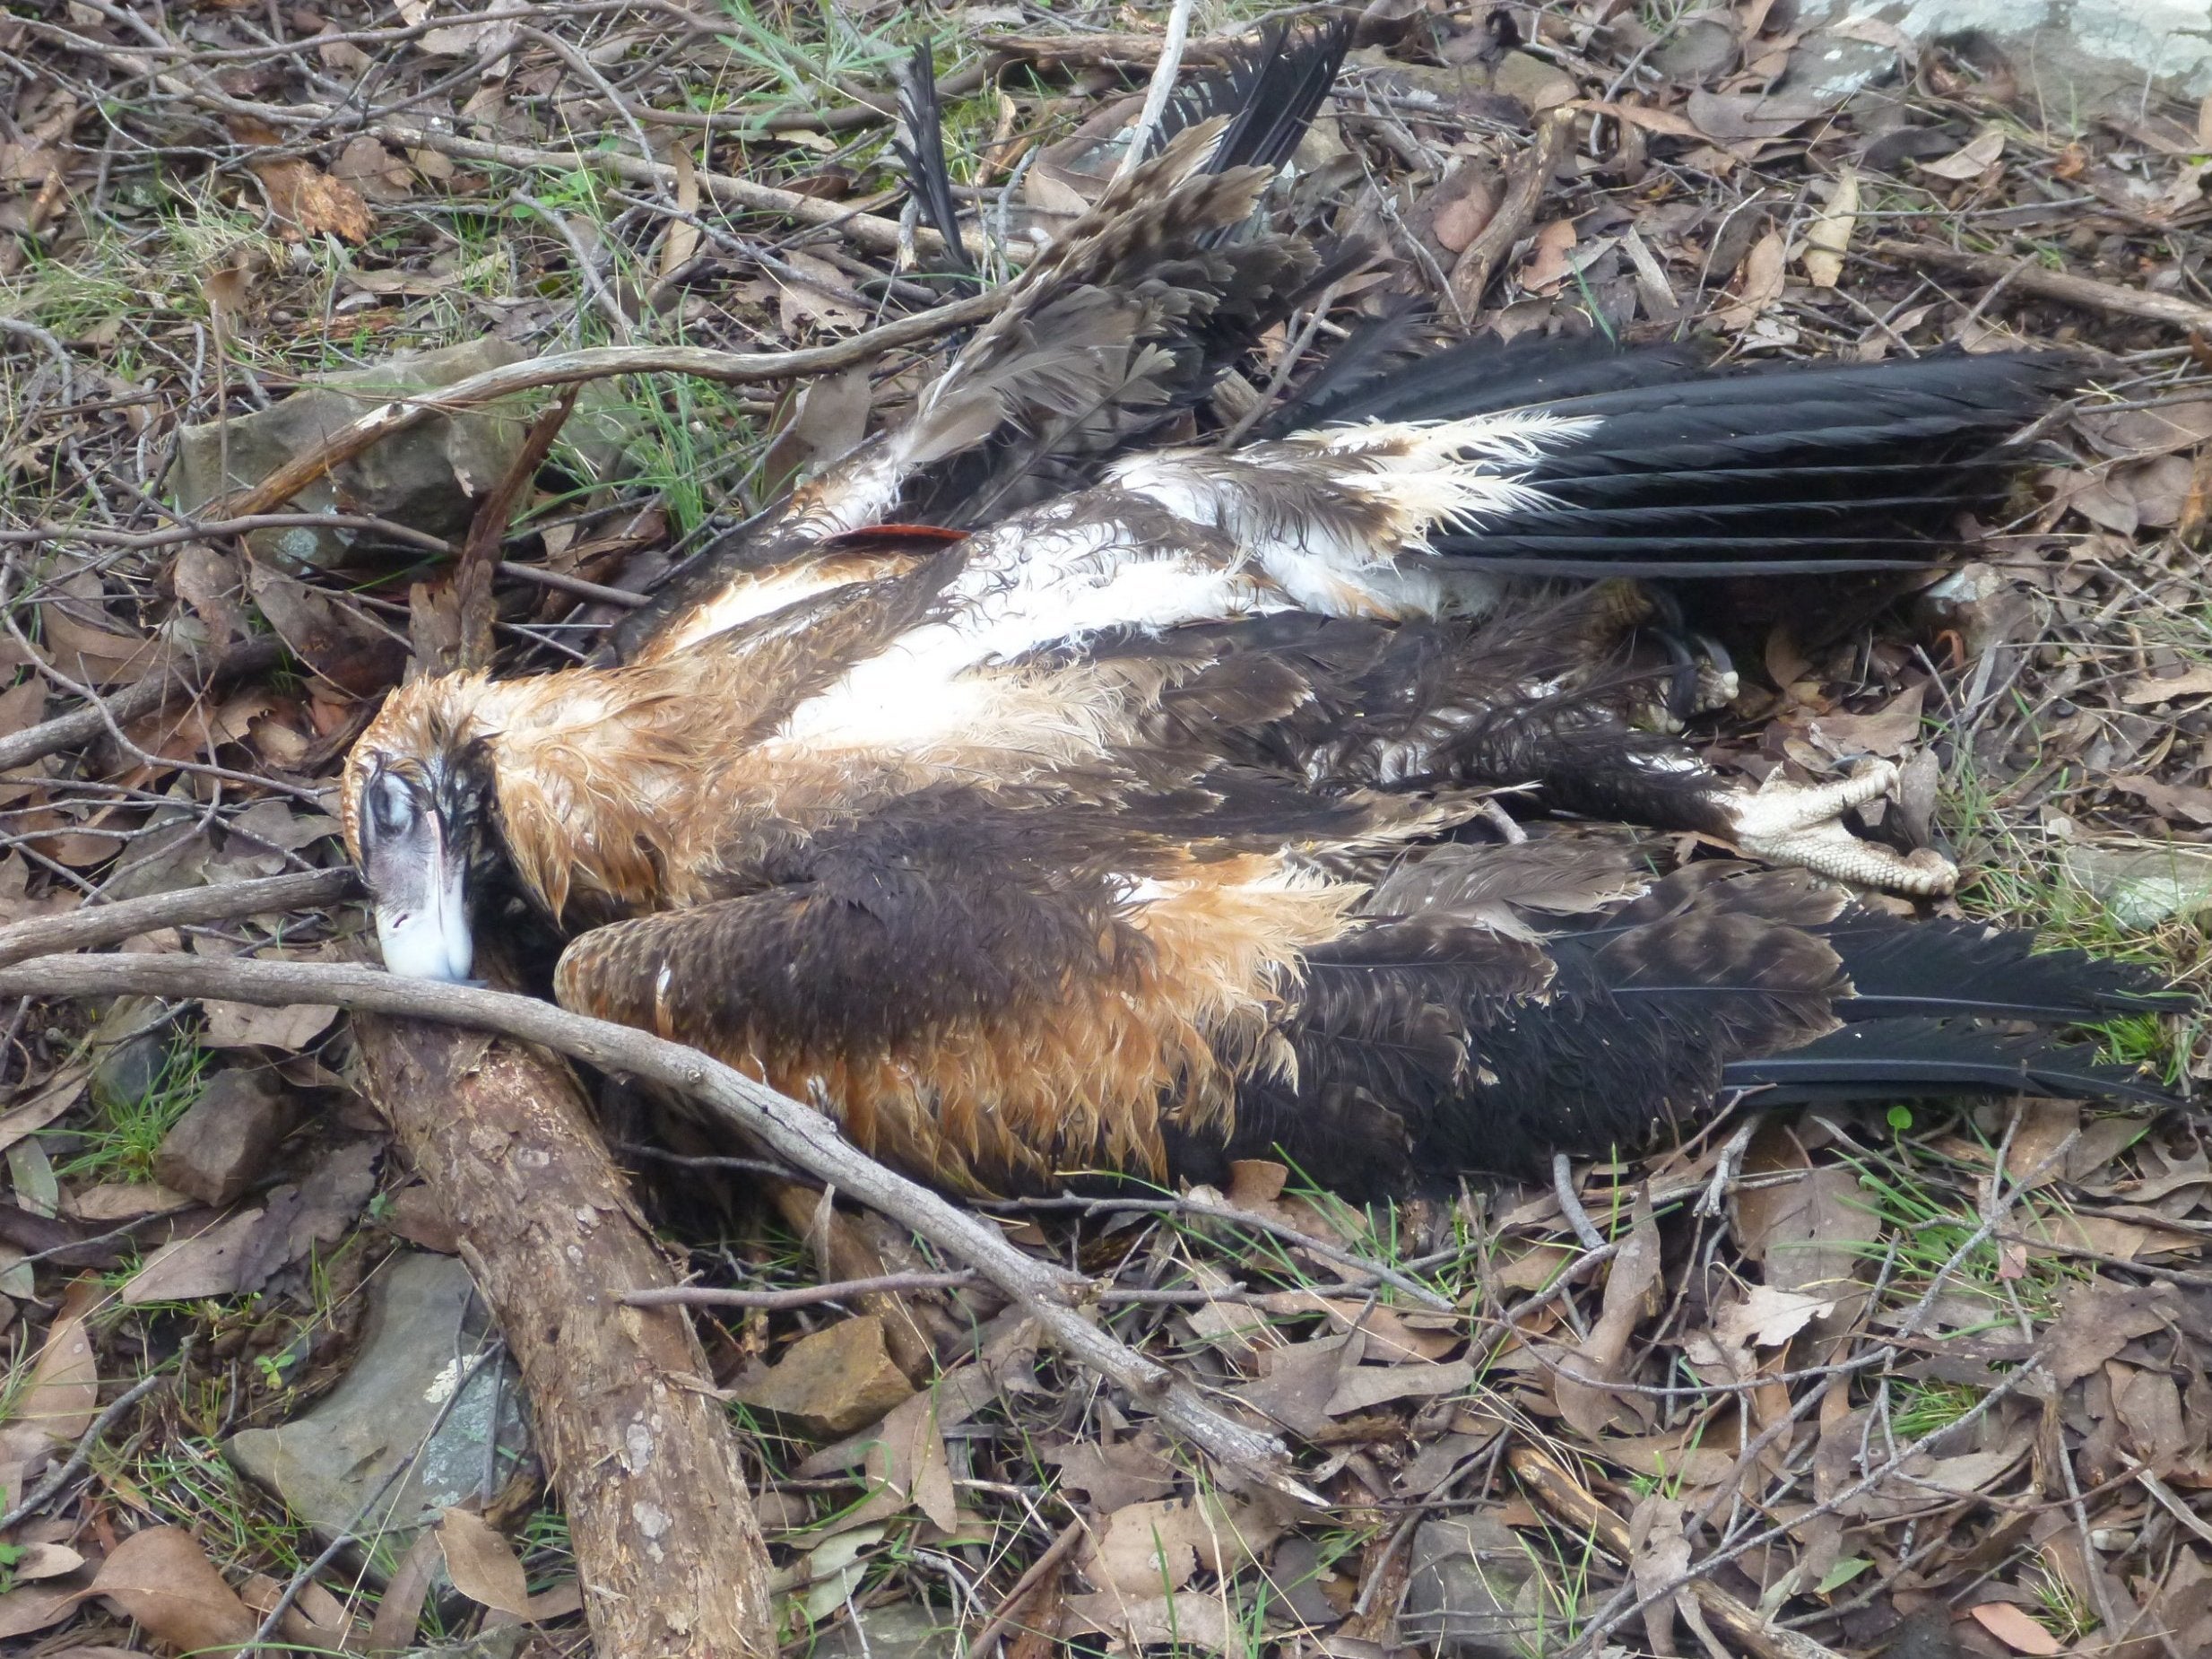 The remains of a wedge-tailed eagle in Victoria, Australia. The species has a full wingspan of up to 2.84m